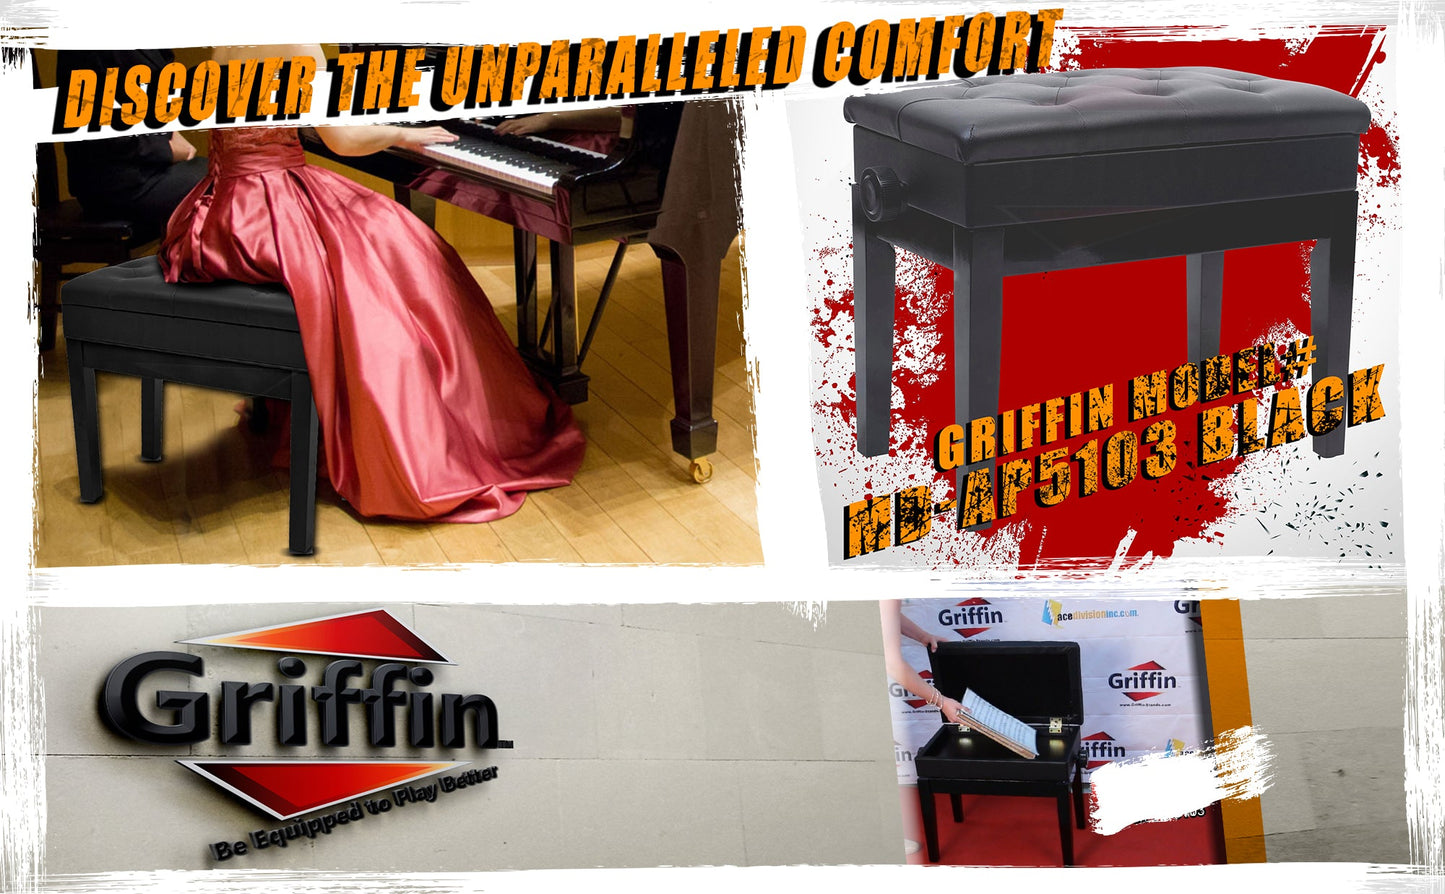 GRIFFIN Premium Antique Piano Bench - Adjustable Black Solid Wood Frame & PU Leather Padded Cushion